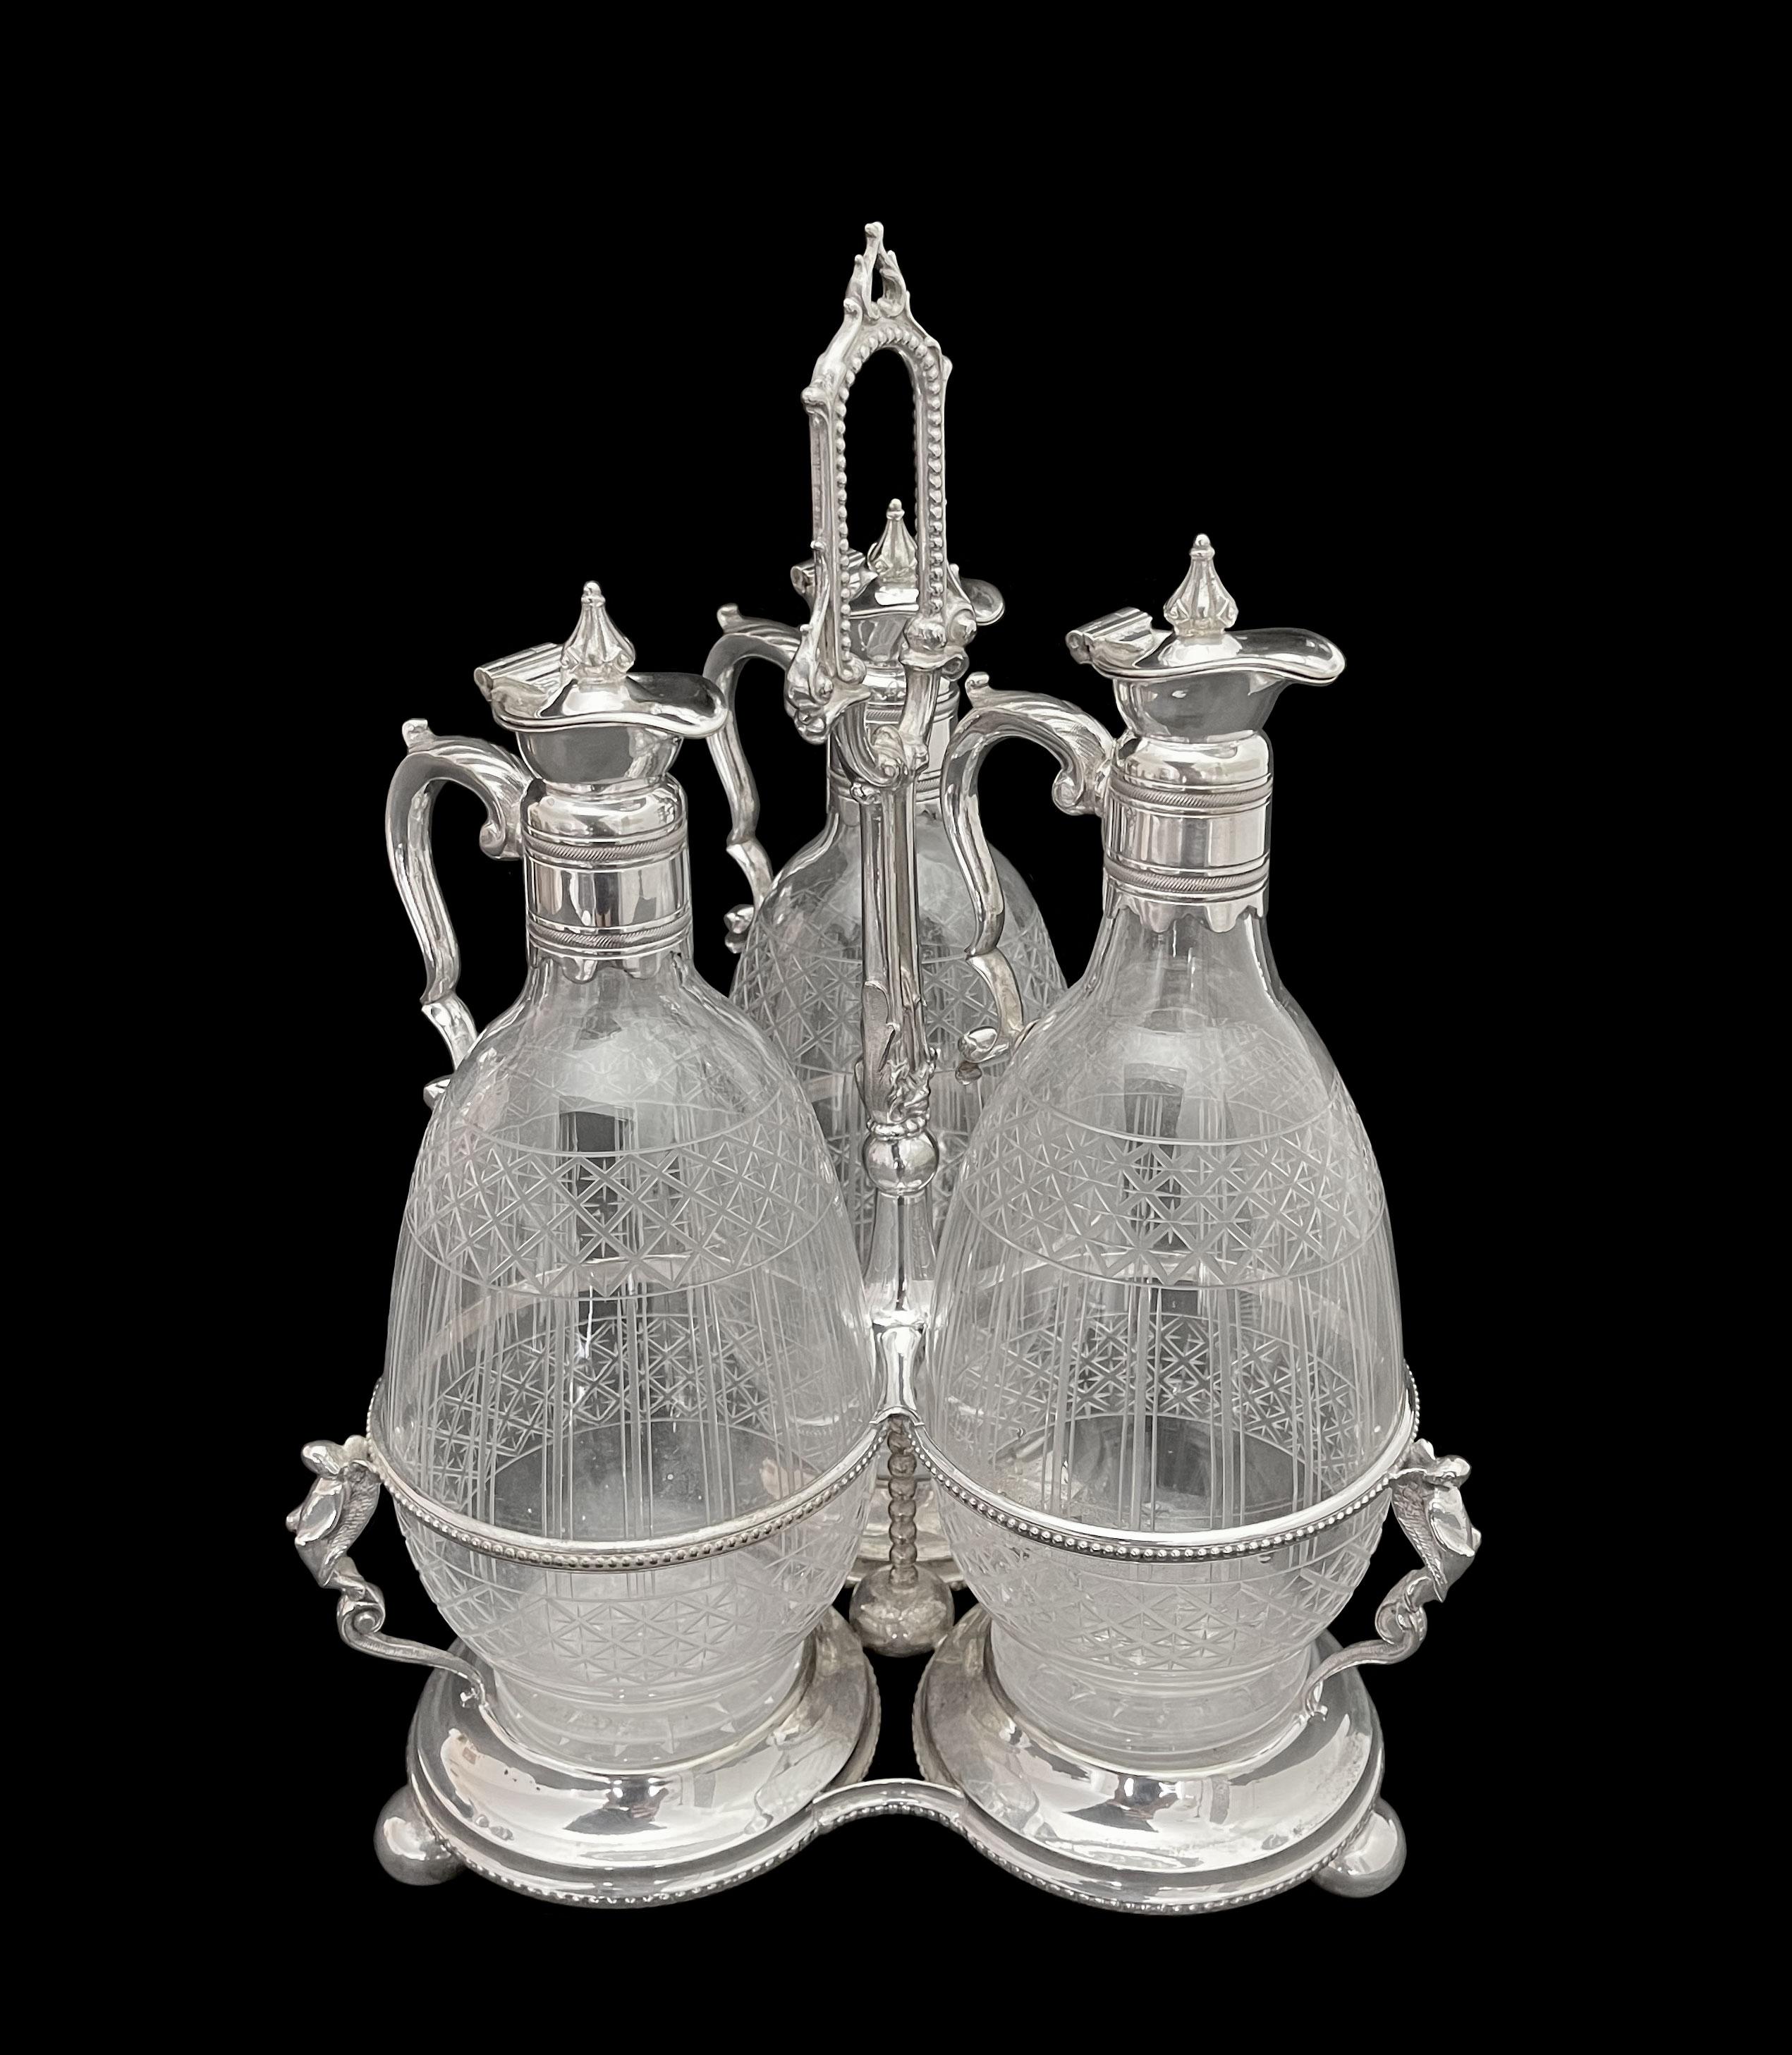 Hand-Carved 19th CenturyBritish Cut Crystal Mounted Silver Plated Cruet Set For Sale